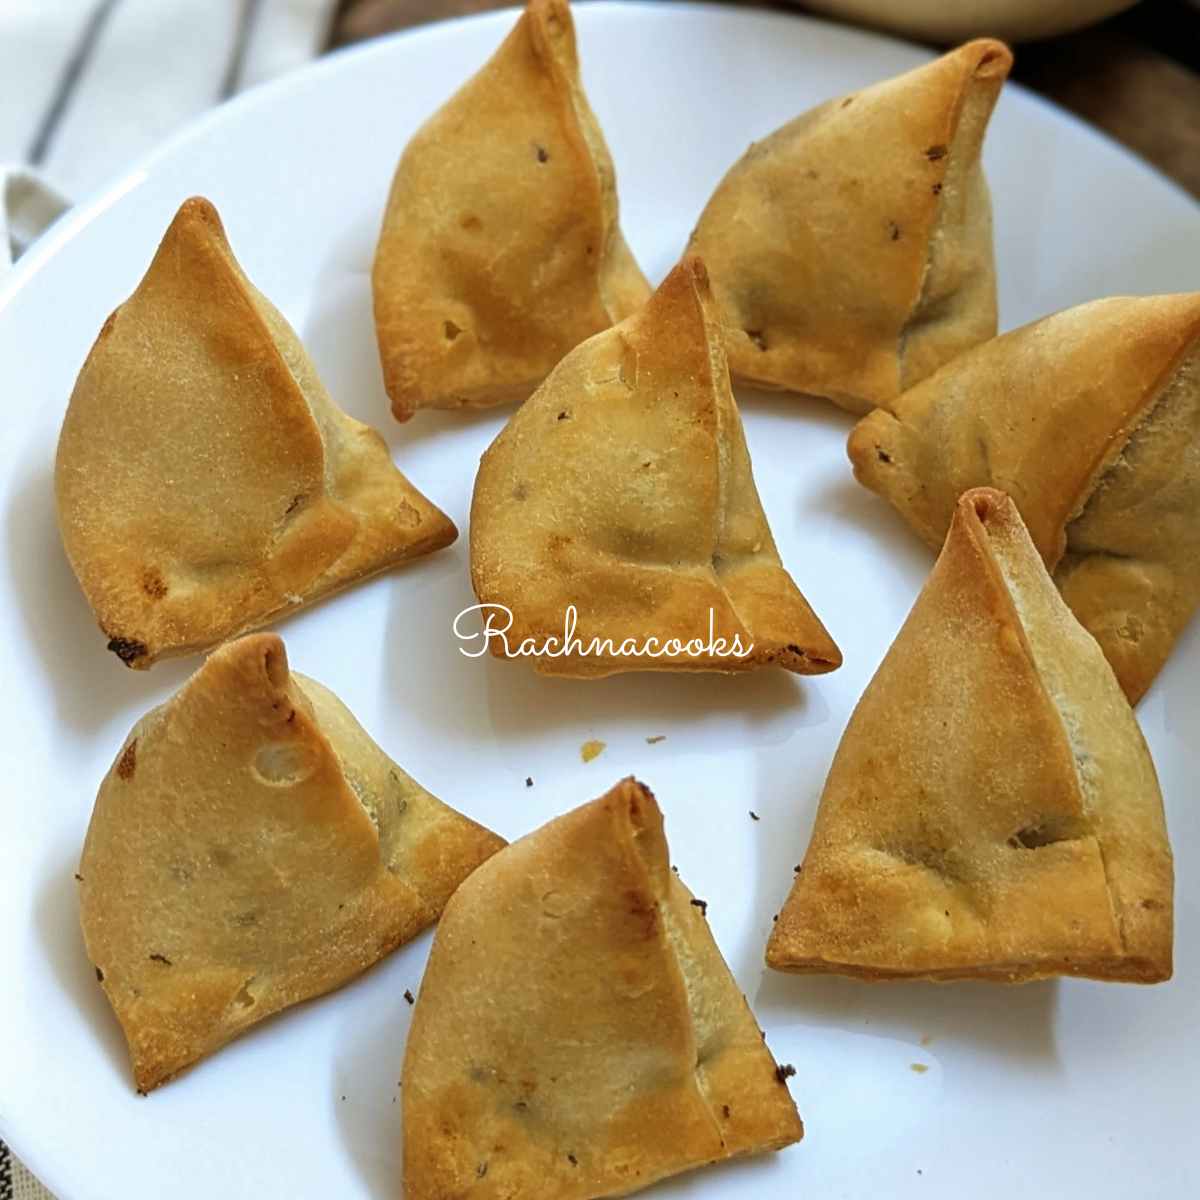 A plate of air fried frozen samosas served on a white plate.